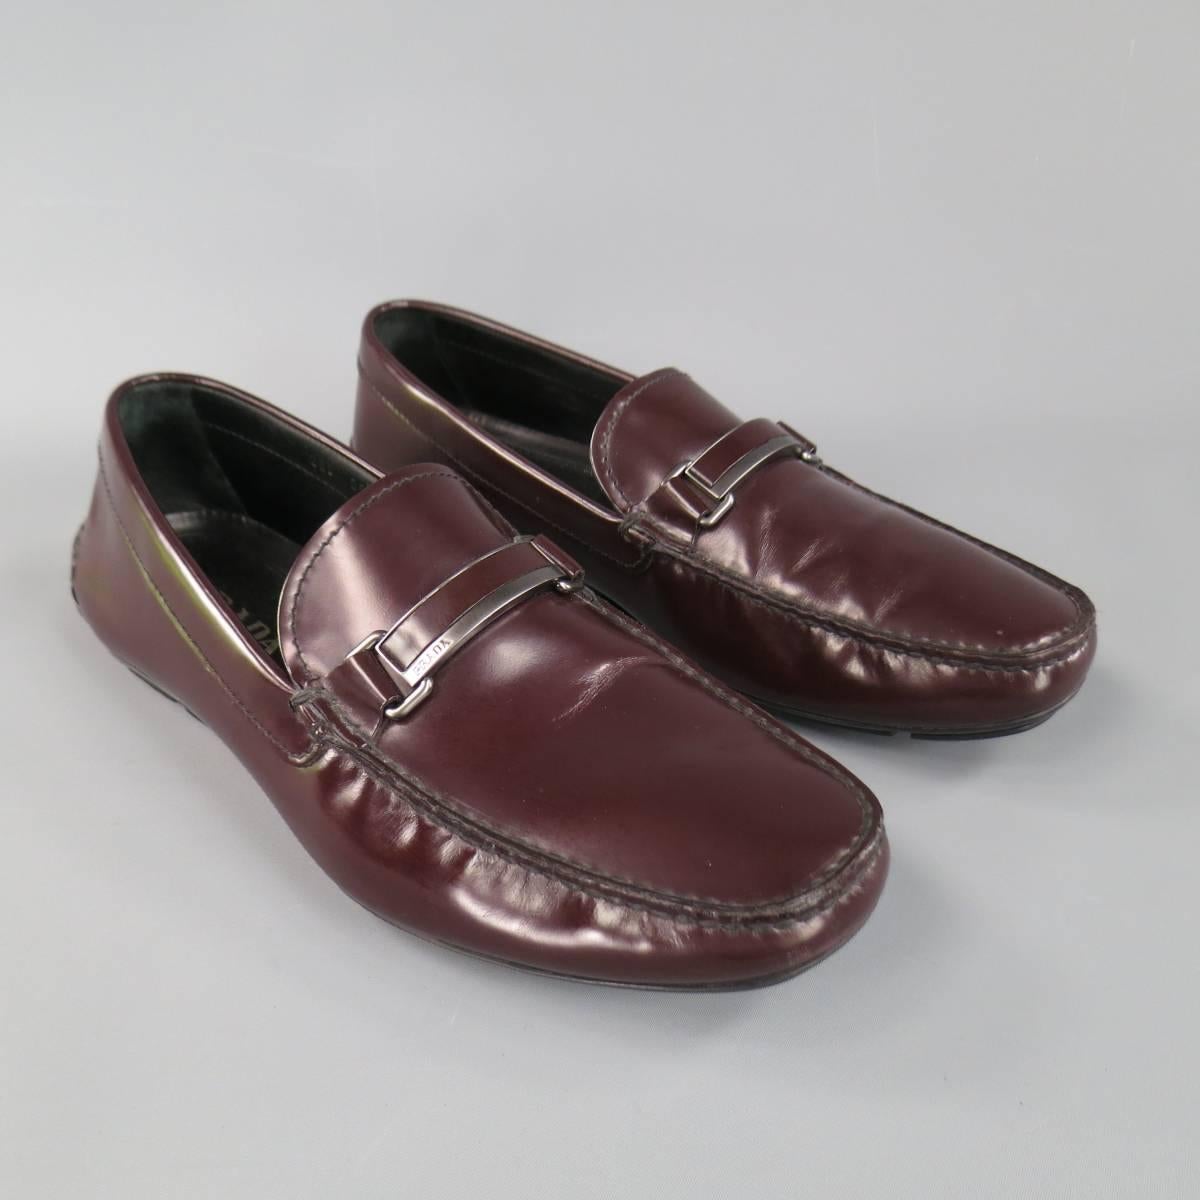 Classic driver sole PRADA loafers in burgundy leather with dark silver tone metal engraved strap. Made in Italy.
 
Excellent Pre-Owned Condition.
Marked: 9
 
Outsole: 12 x 4 in.